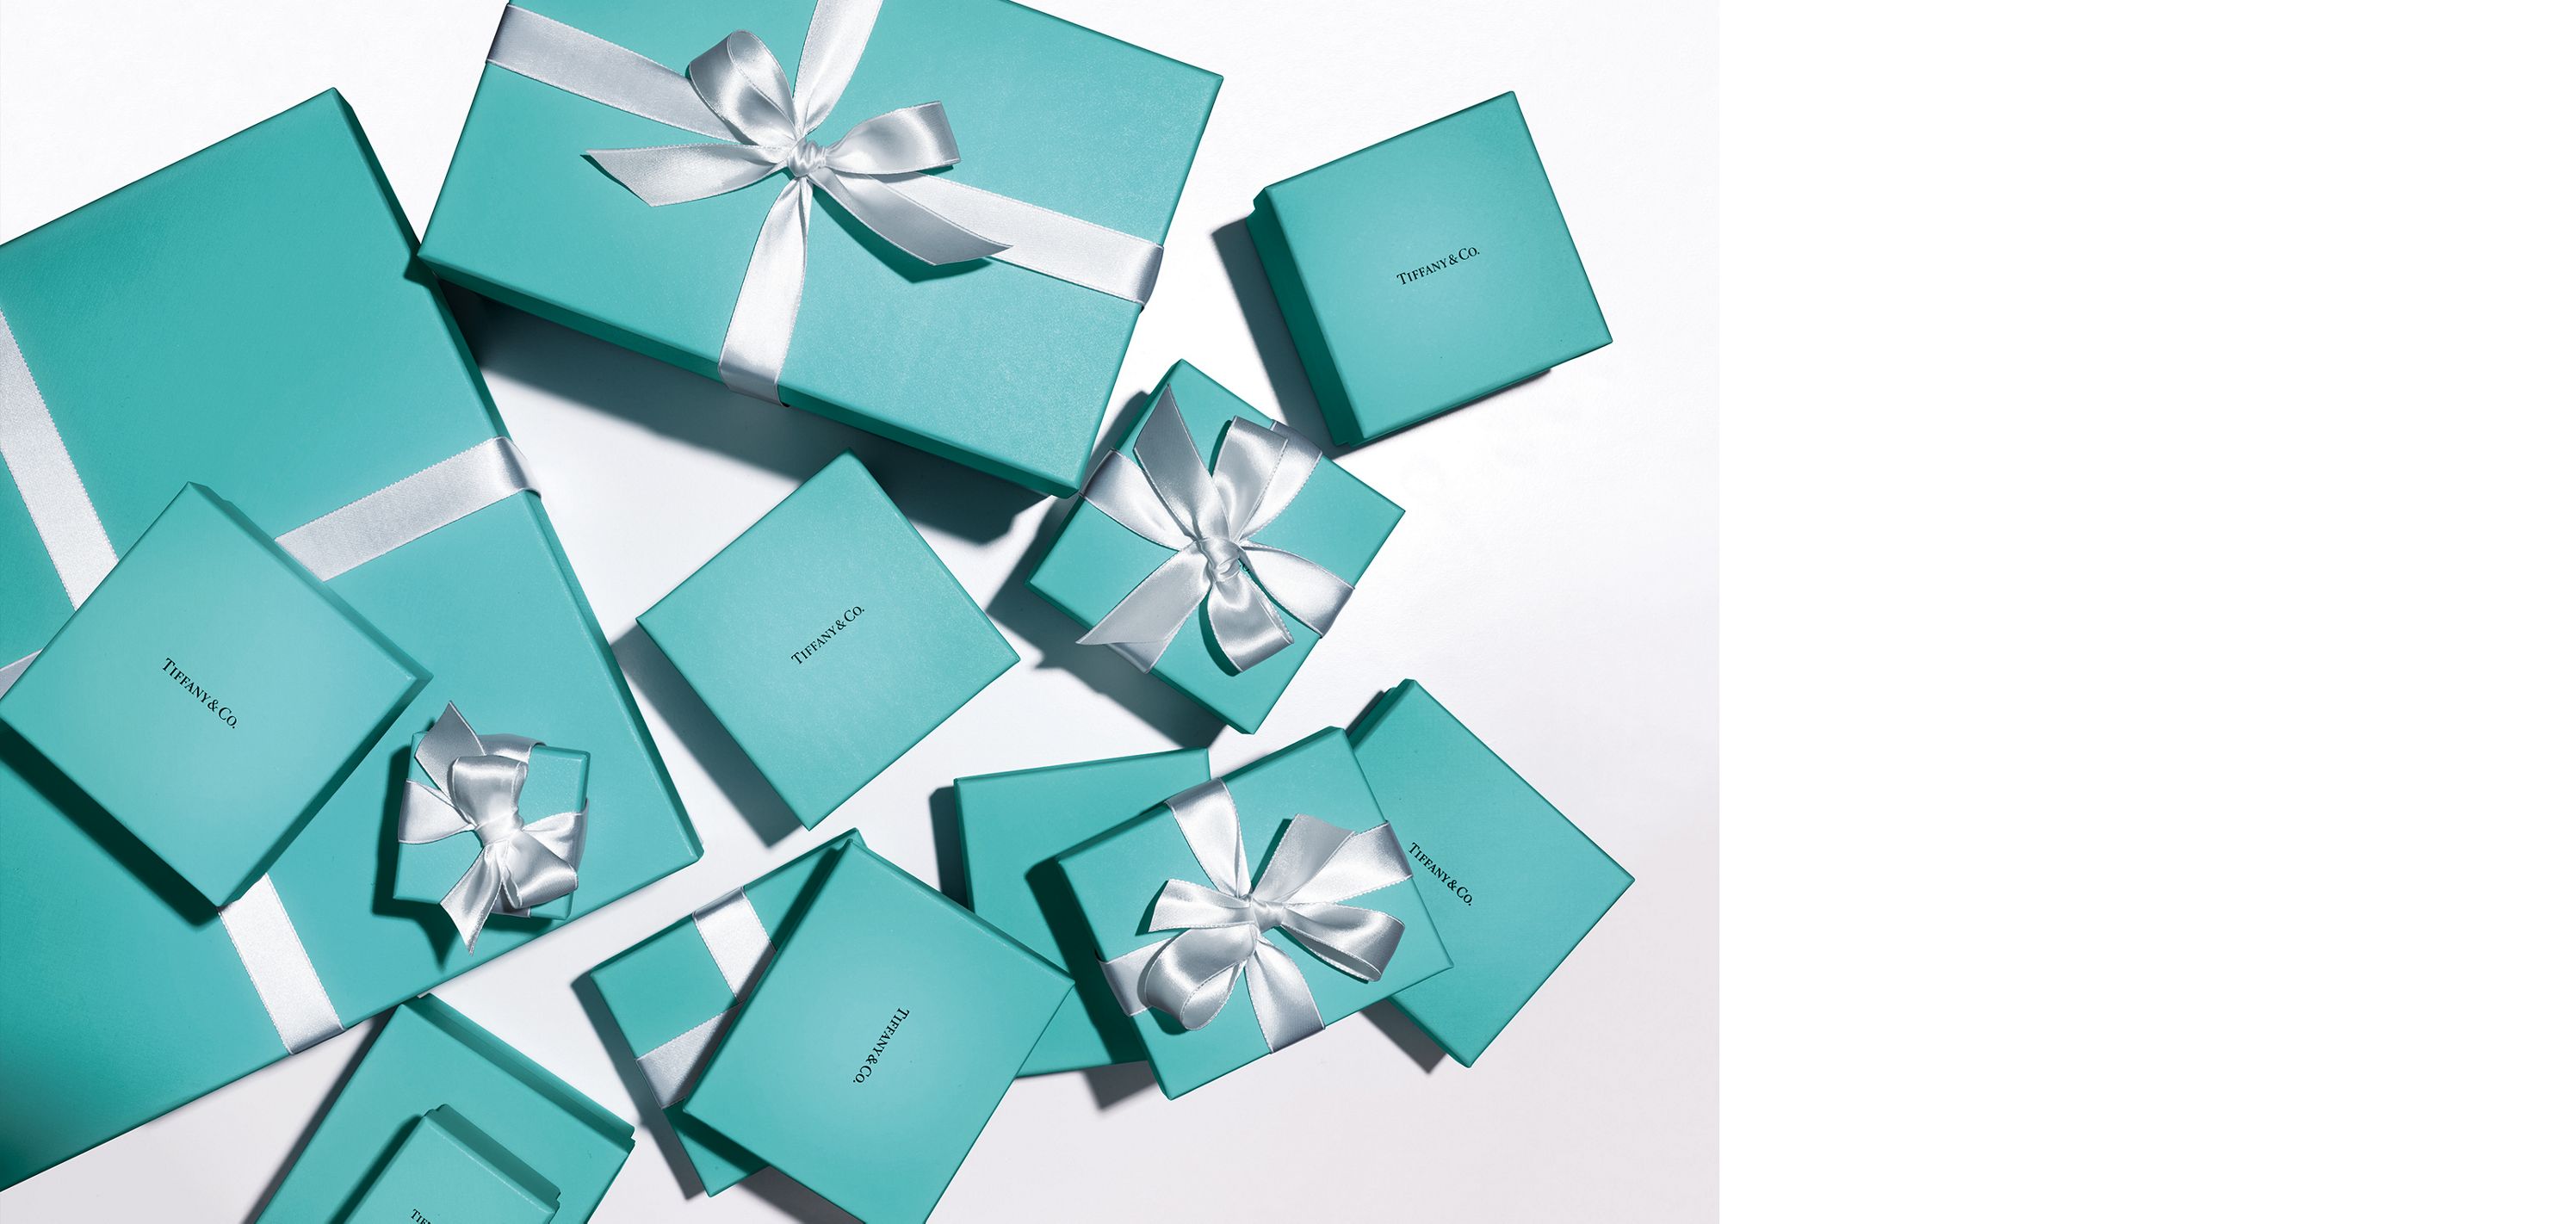 Blue Box Cafe Reservations at Tiffany & Co. in New York City - Sojourn  Smitten